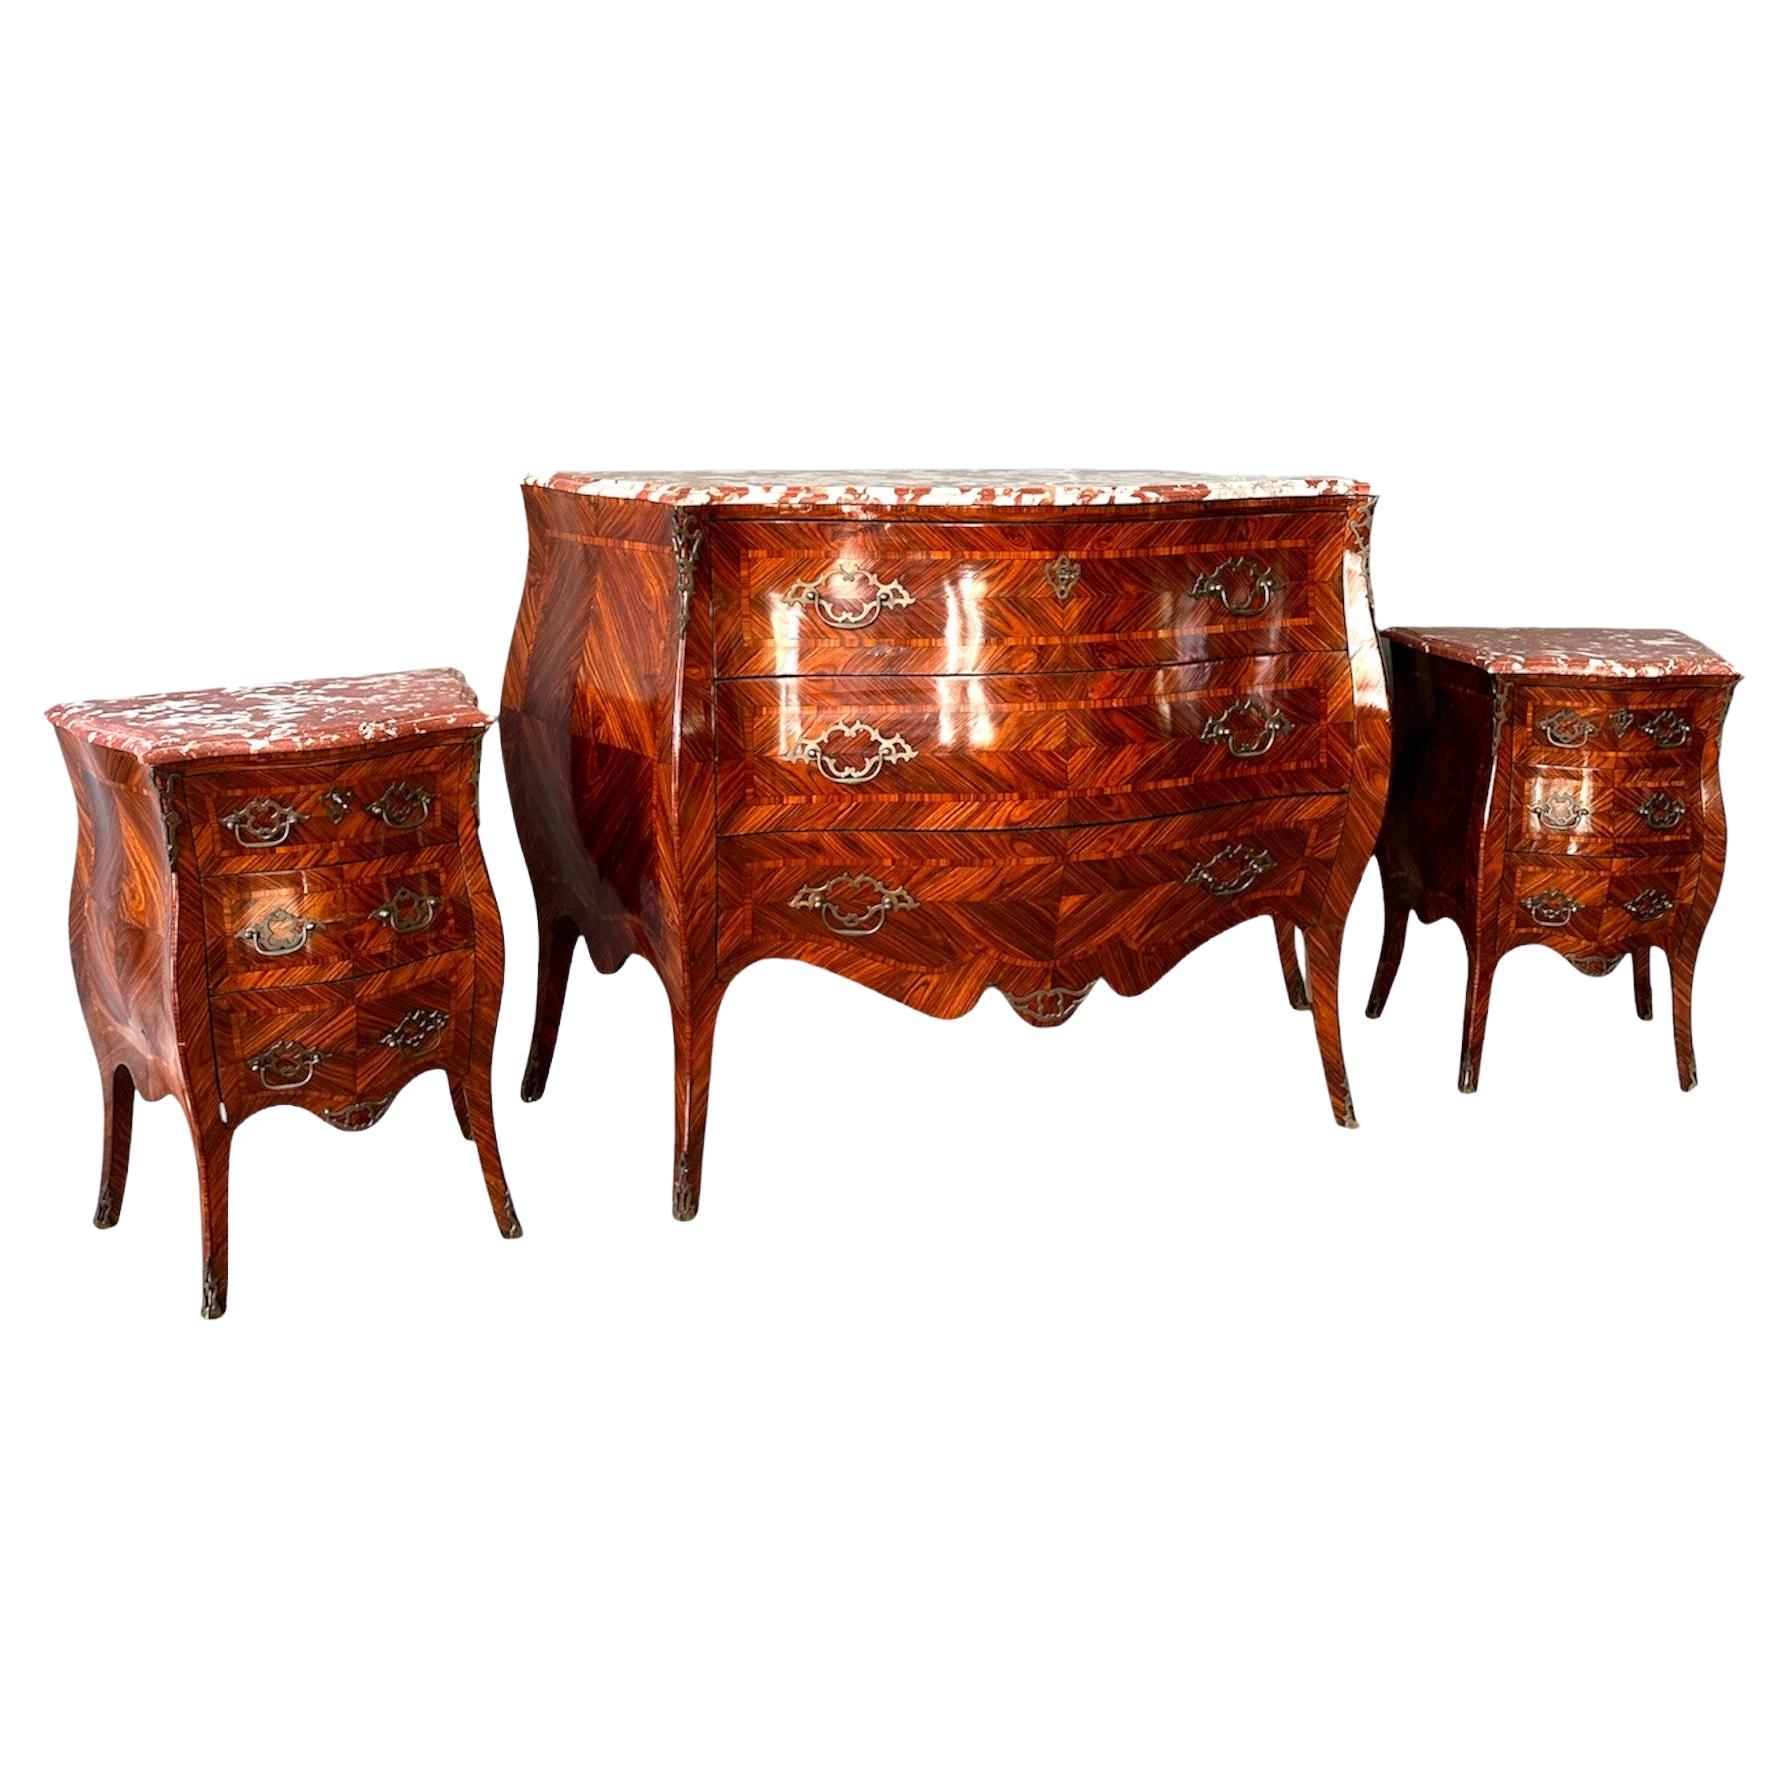 19th Century, Napoleon III, Dresser And Two Nightstands In Ebony And Marbles For Sale